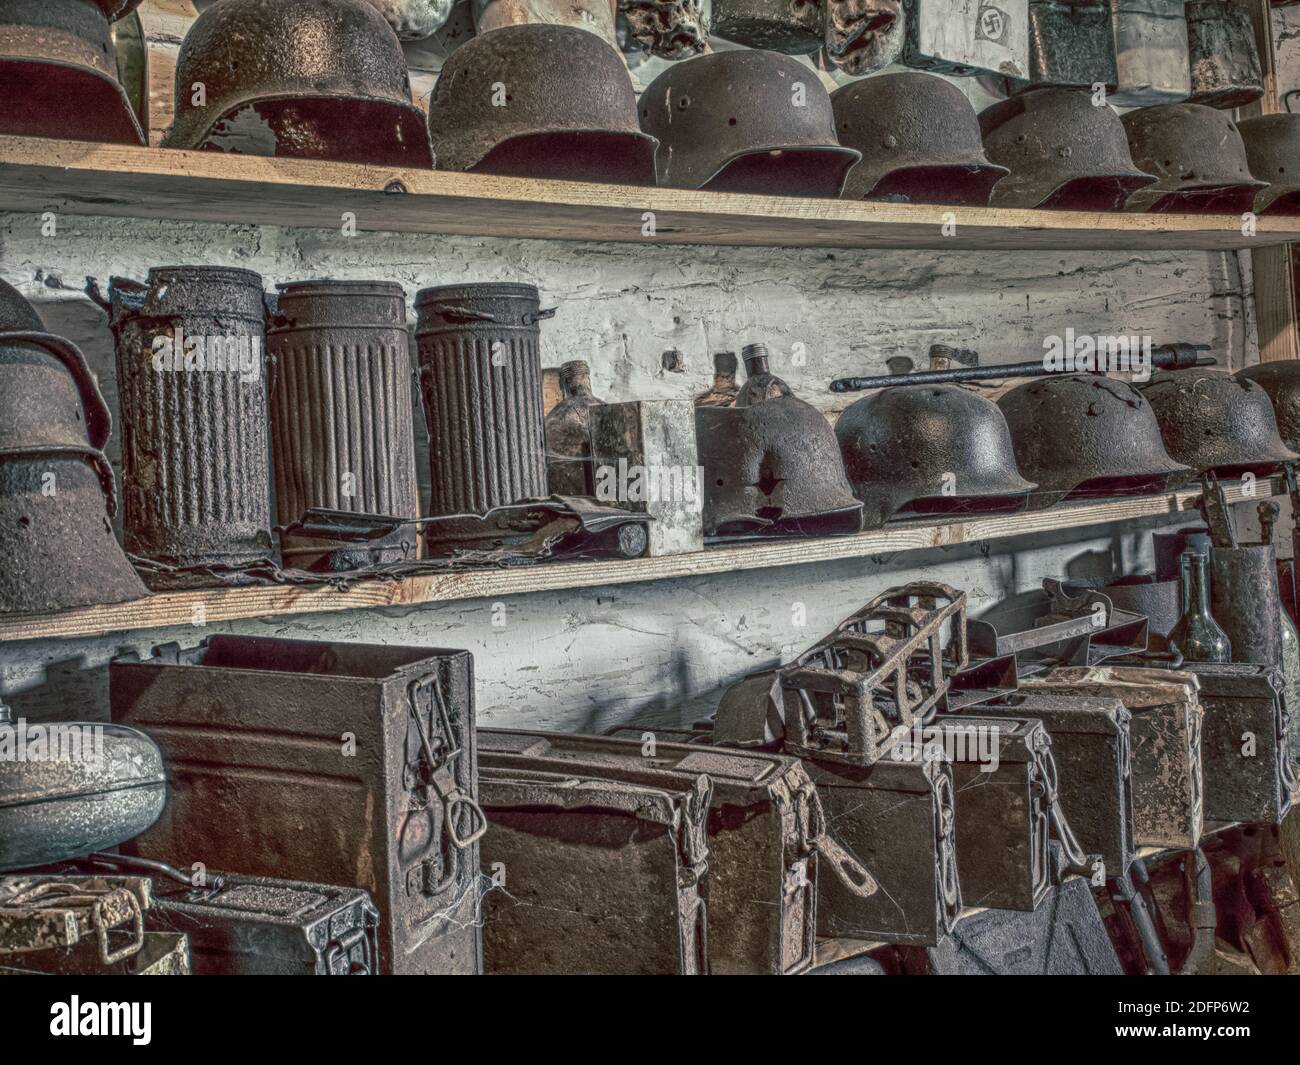 Zyndranowa, Poland - August 13, 2017: Collection of old metal helmets, vessels and other war accessories at the Lemko culture museum. Vintage photo. Stock Photo